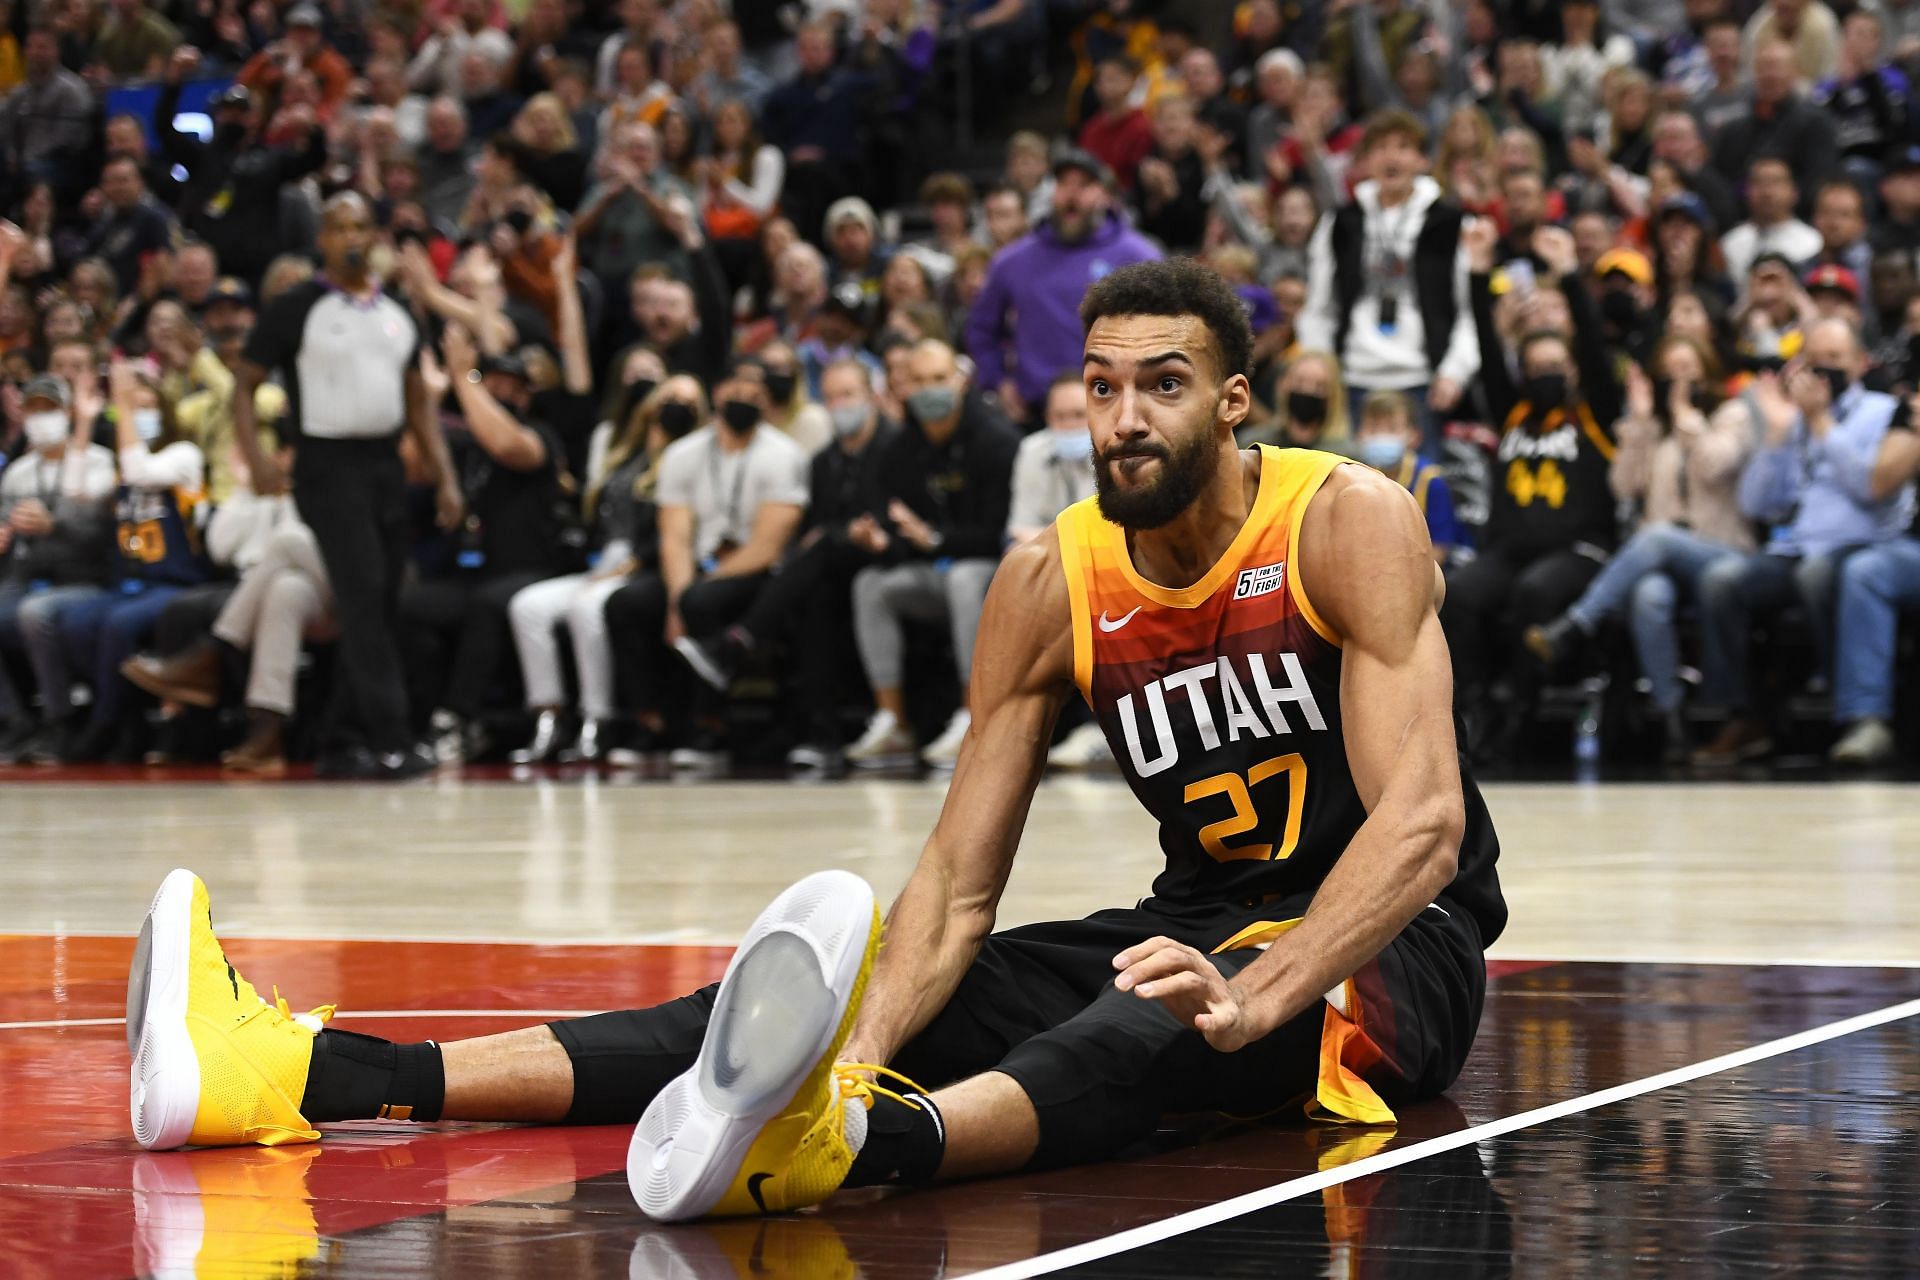 The Jazz have ruled out Rudy Gobert for the game against the Pistons.